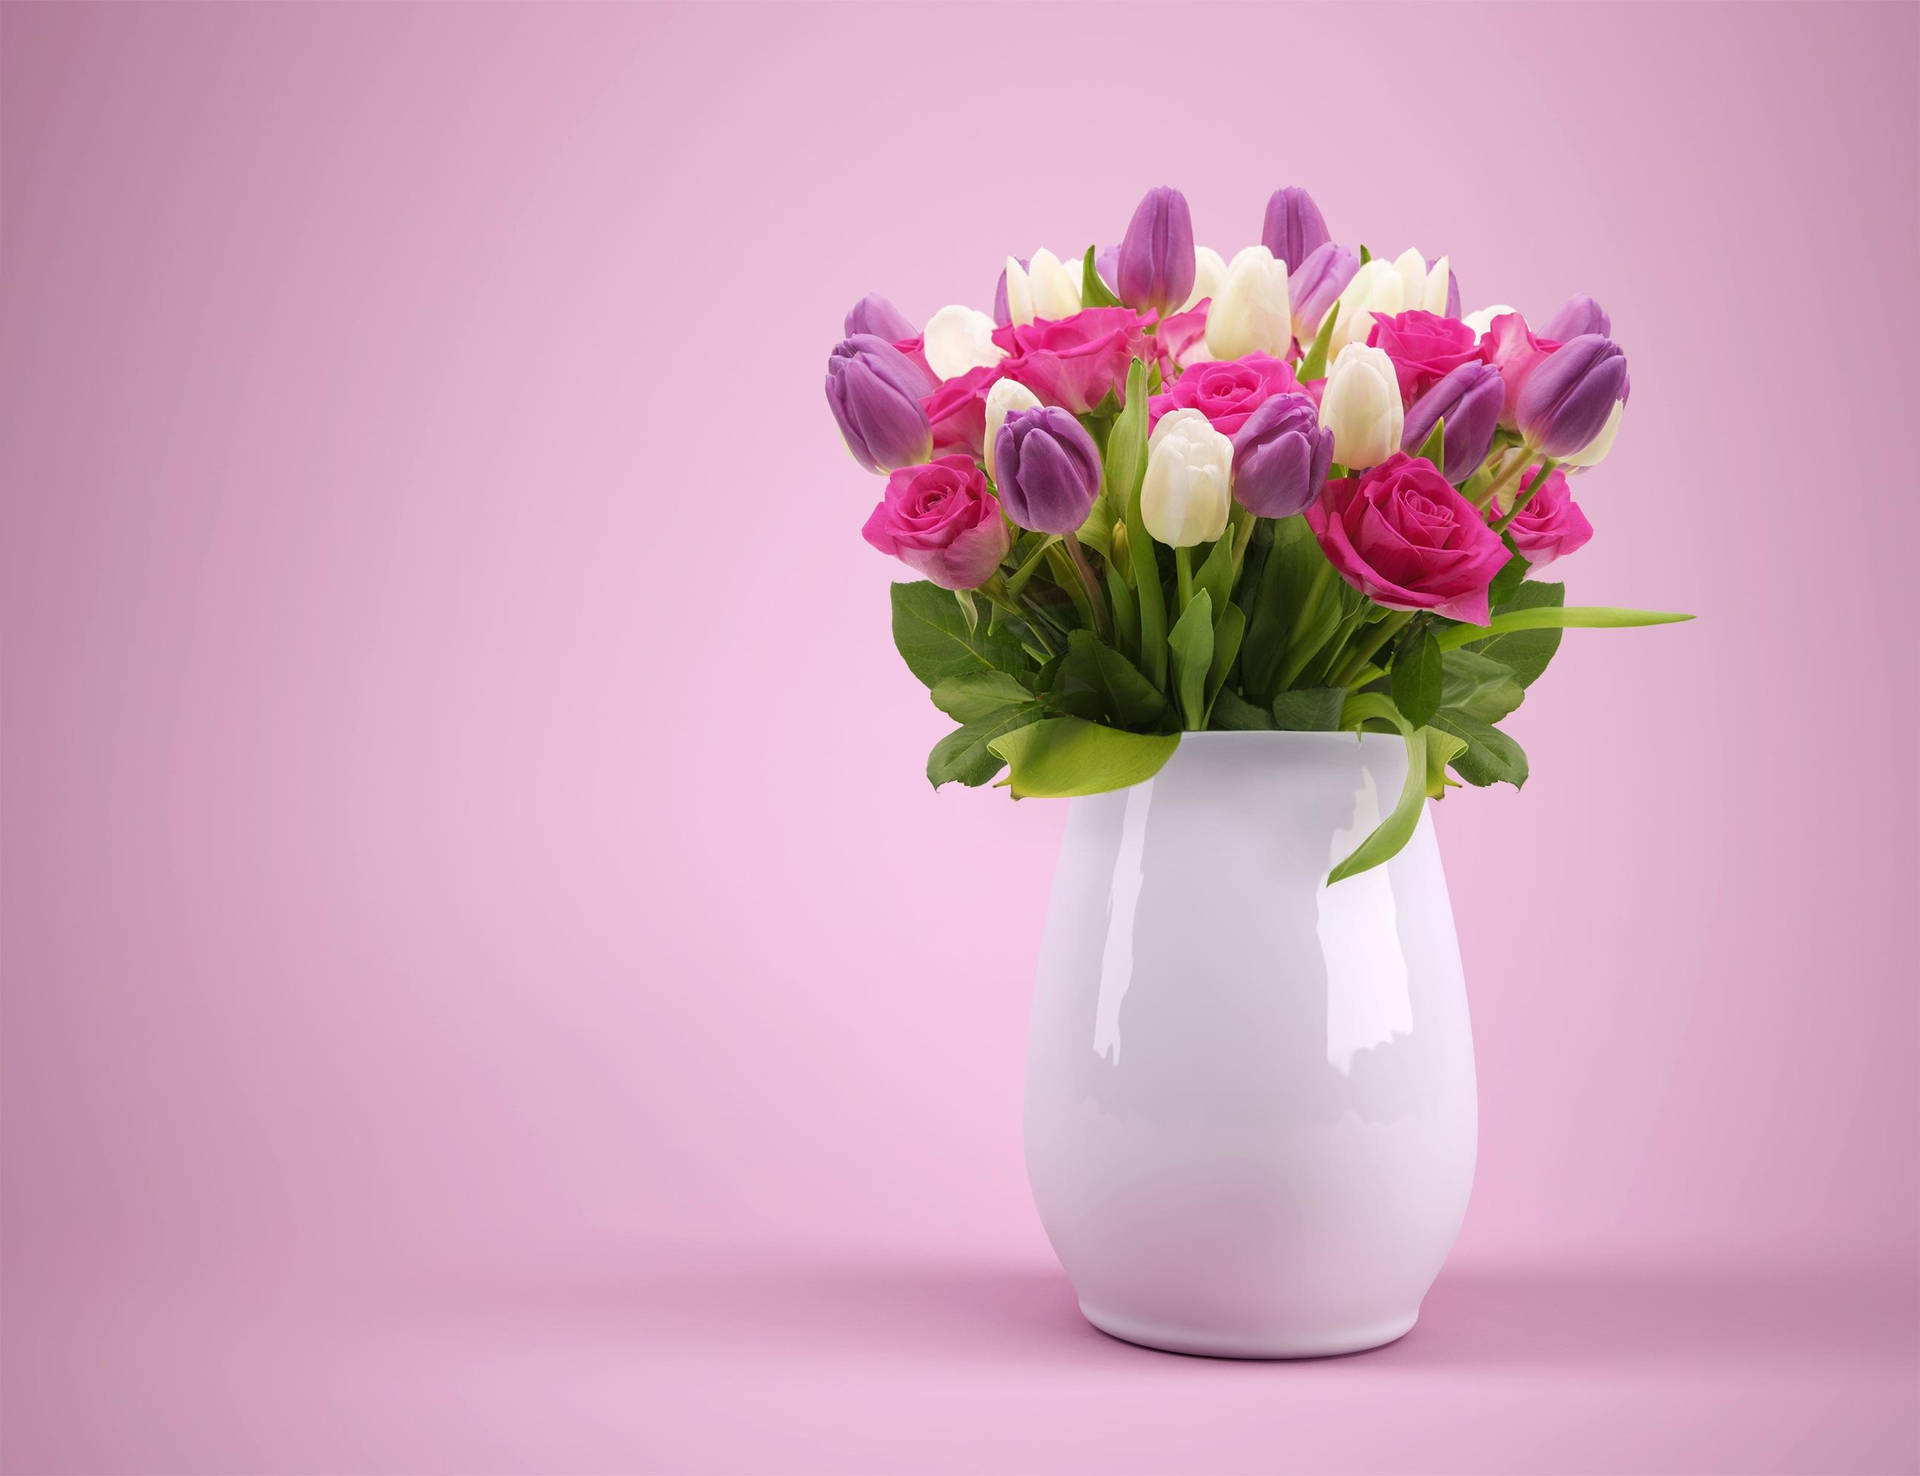 Flower Vase With Tulips And Roses Wallpaper